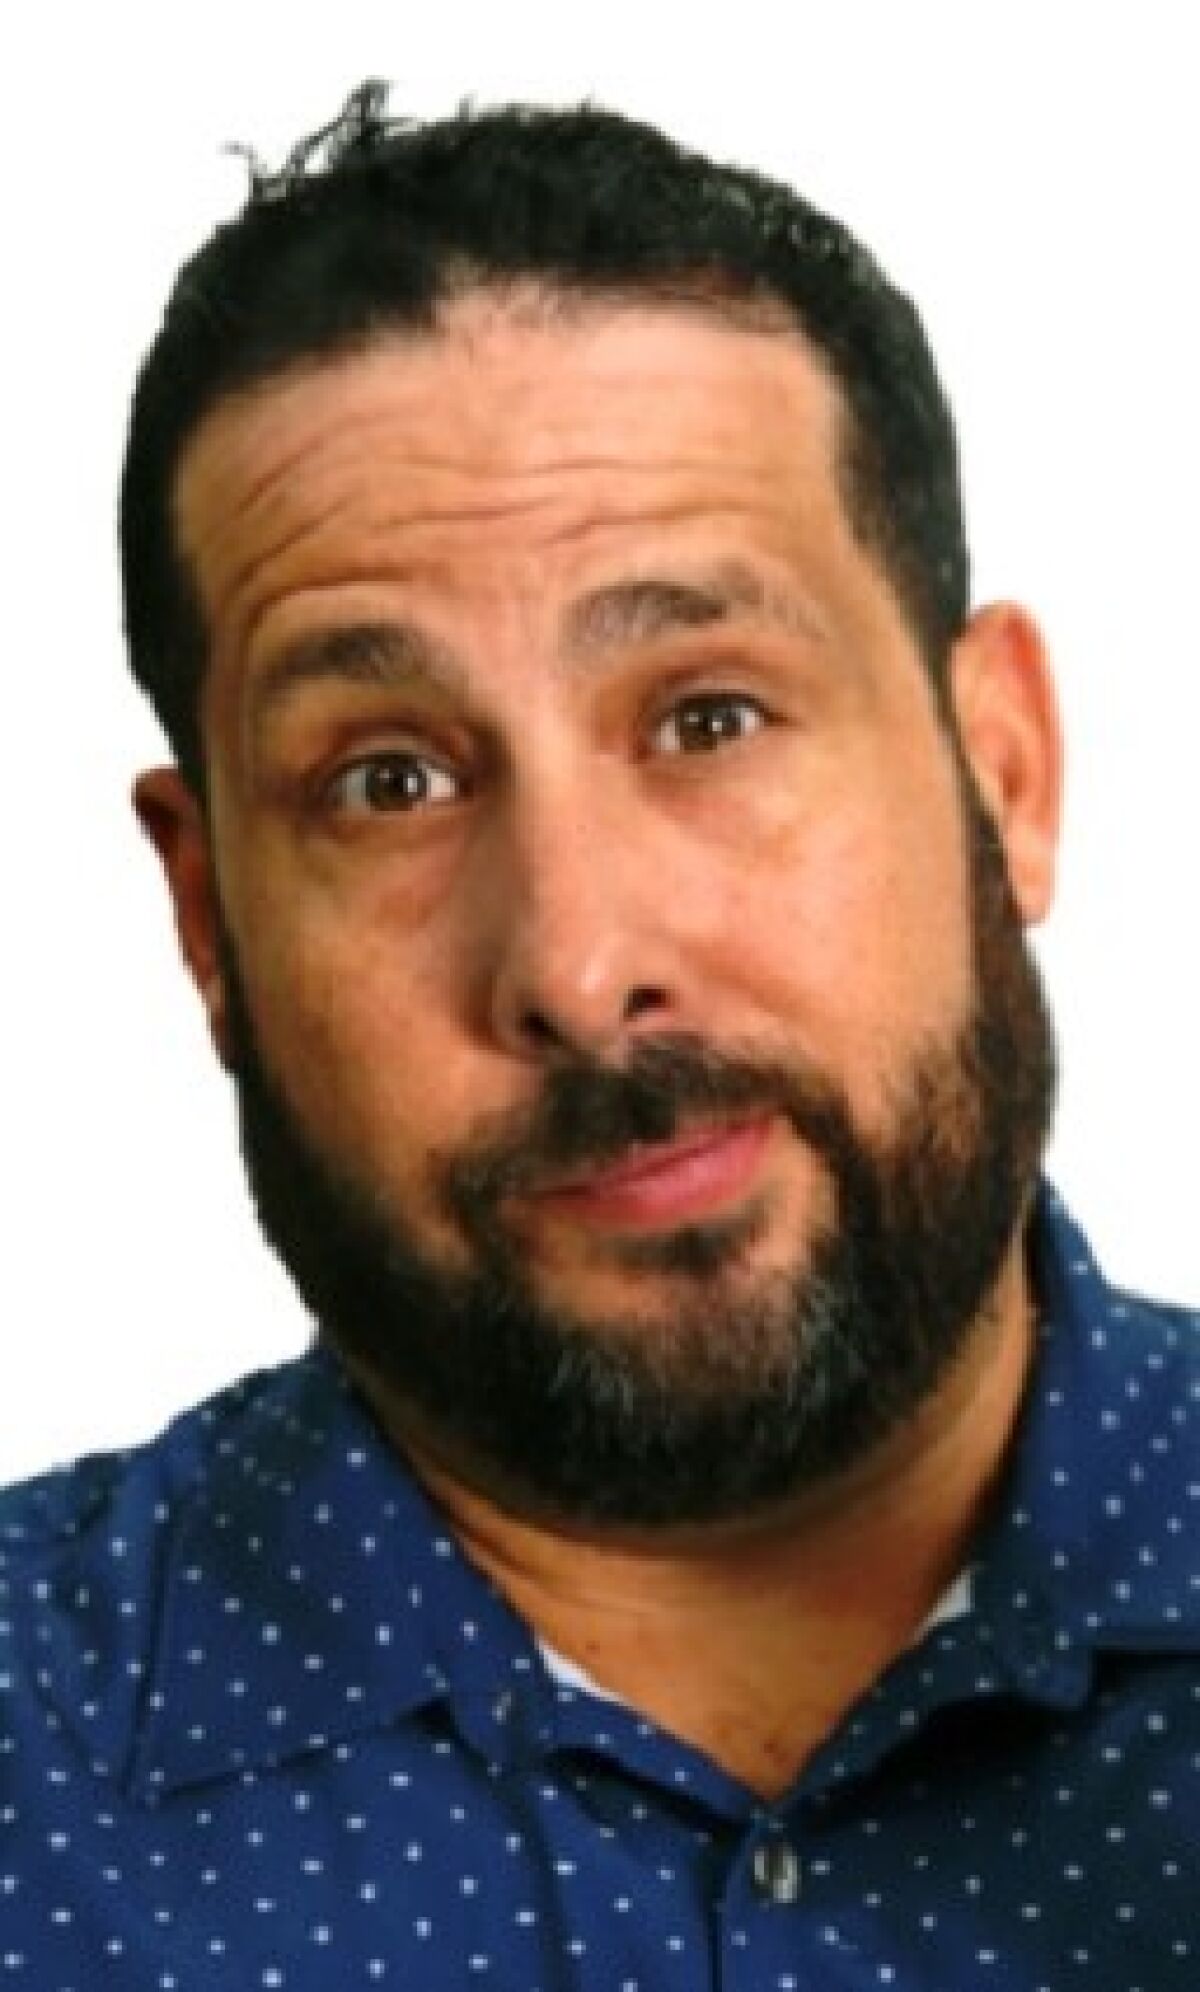 The Comedy Store La Jolla will present comedian Steve Treviño at various times Feb. 3-6.